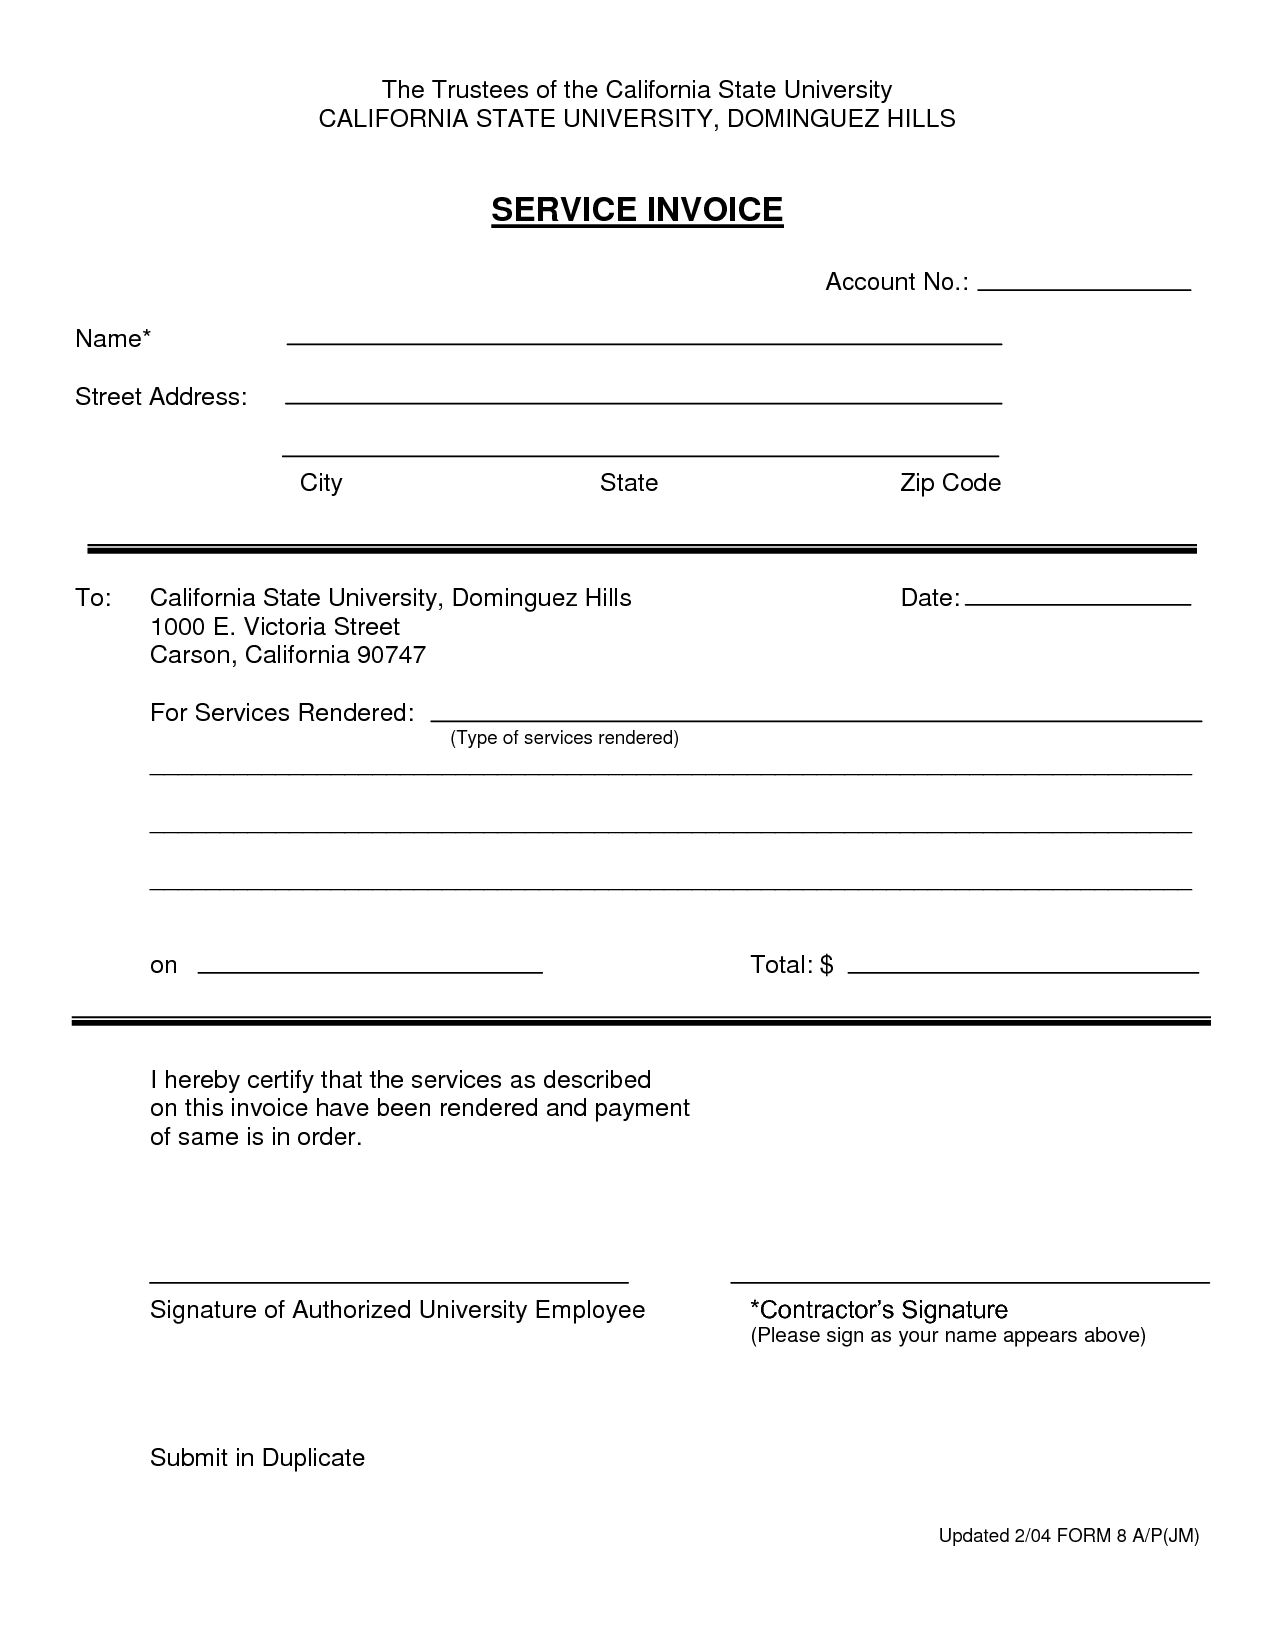 sample invoice for services rendered template home improvement ideas invoice for services rendered template